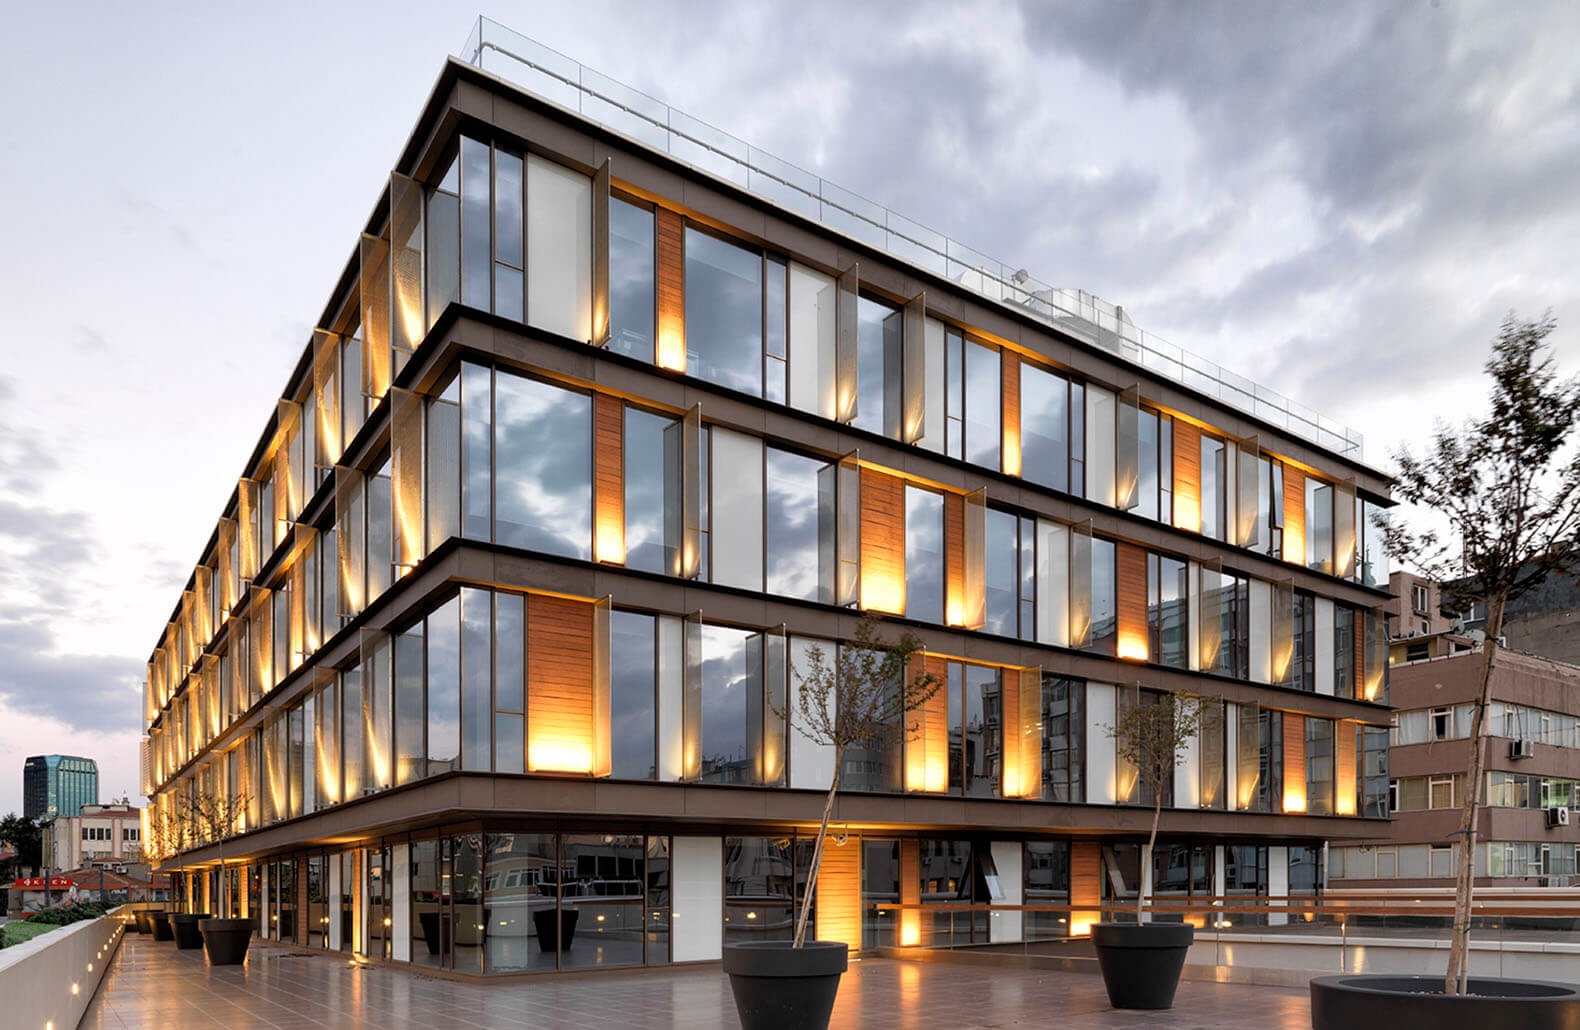 A large office building with lighting arrangement